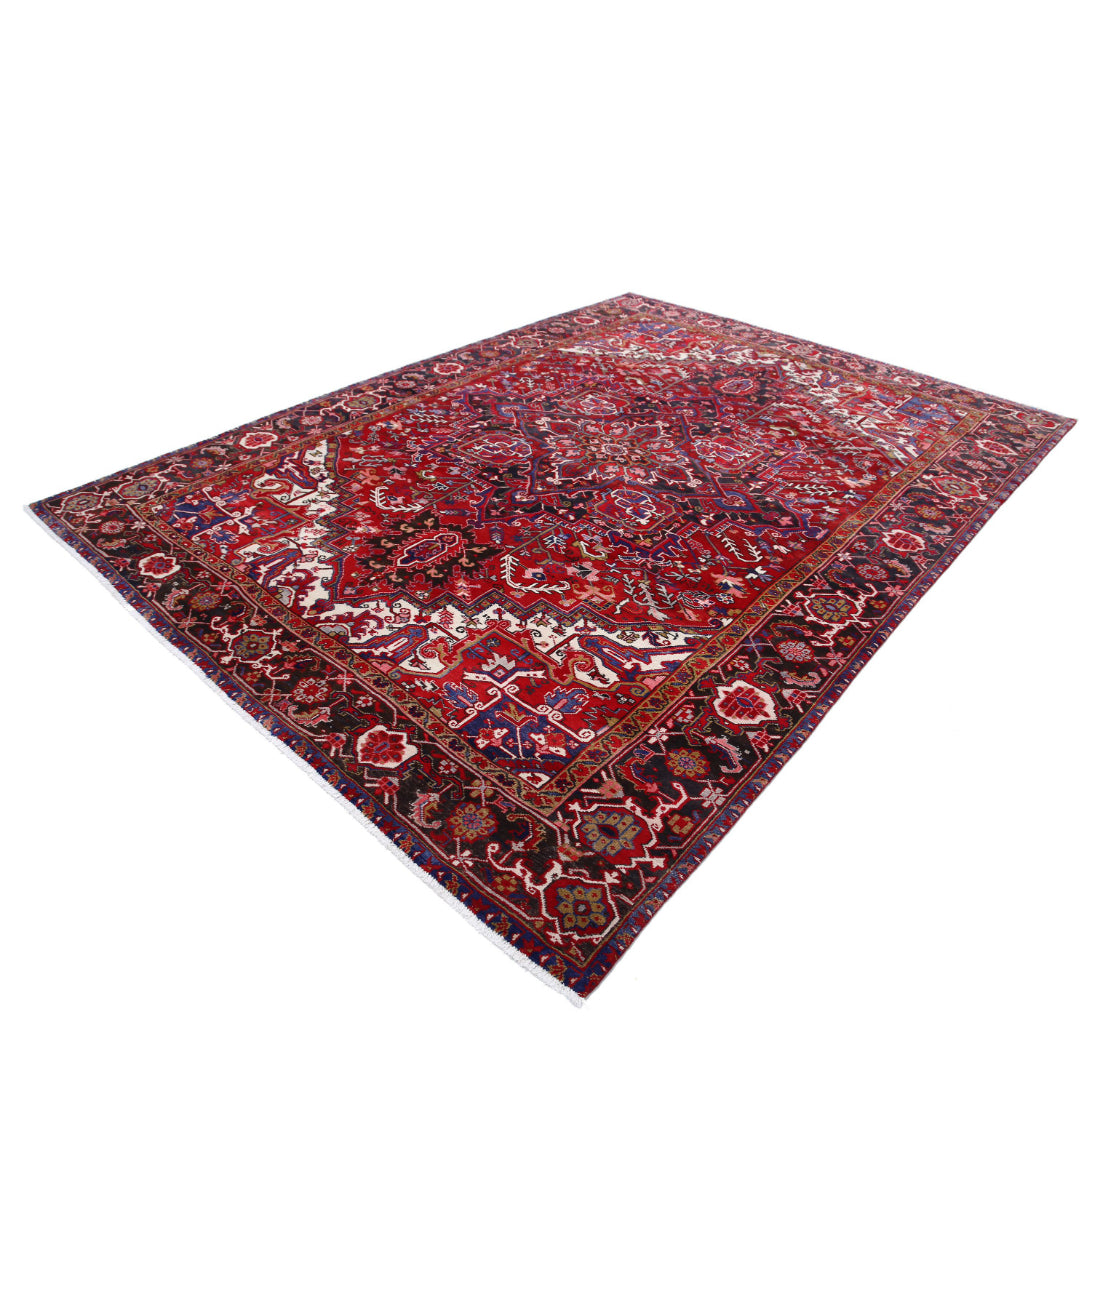 Hand Knotted Semi Antique Persian Heriz Wool Rug - 8'1'' x 11'2'' 8'1'' x 11'2'' (243 X 335) / Red / Blue